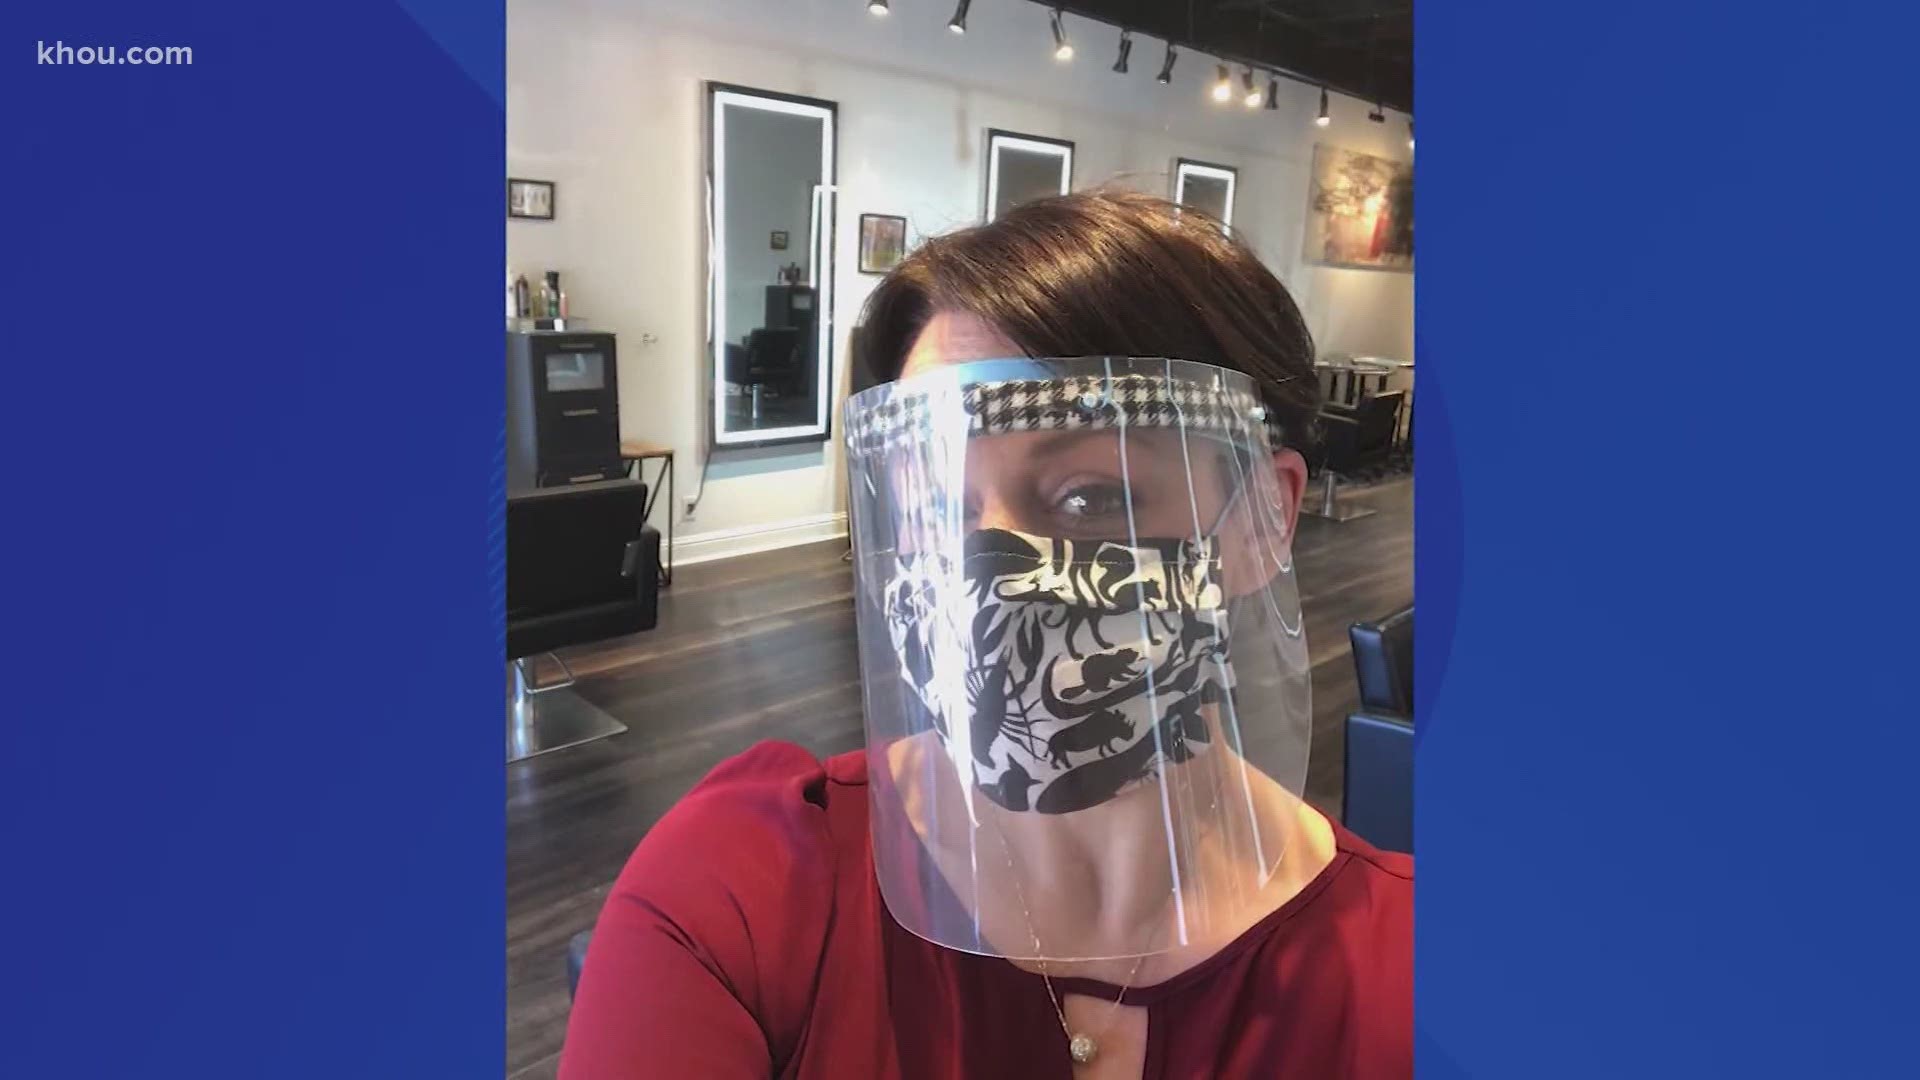 Beauty salons, barbers, nail salons and tanning salons must follow social distancing guidelines and Gov. Abbott said employees and customers should wear masks.